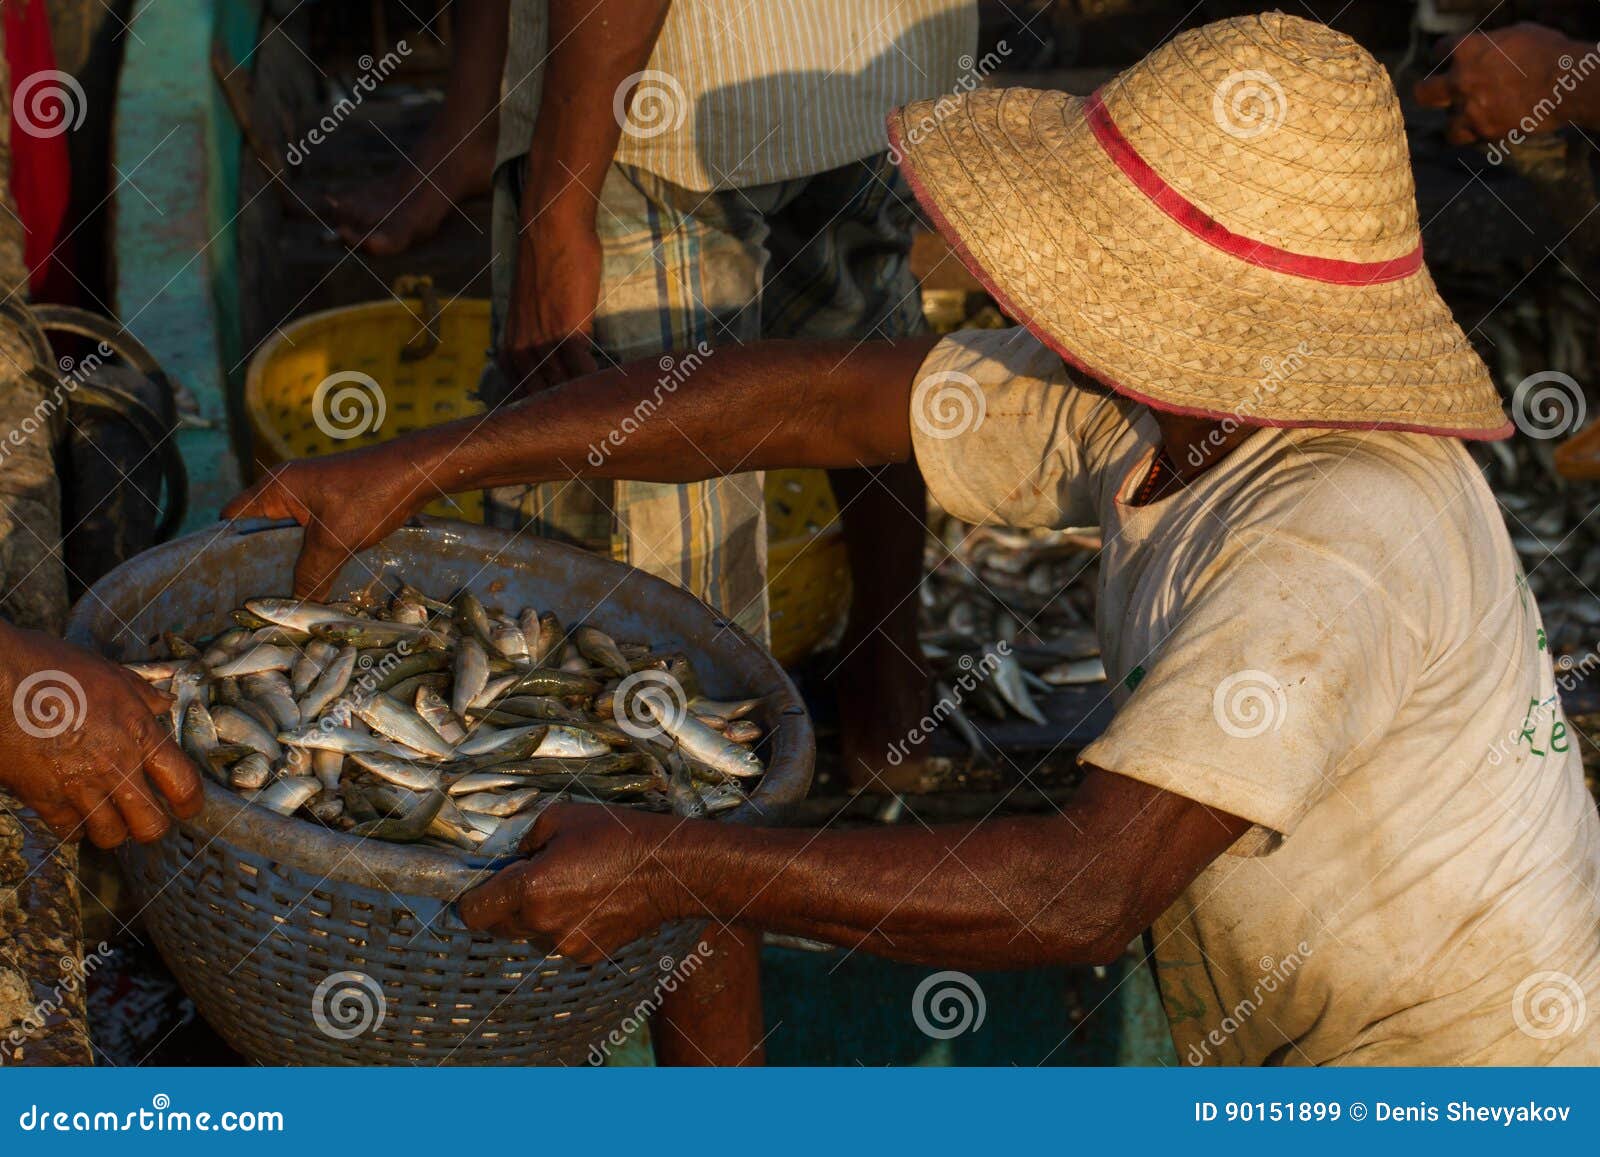 A Fisherman in a Straw Hat Passes a Basket of Fish.Unloading a